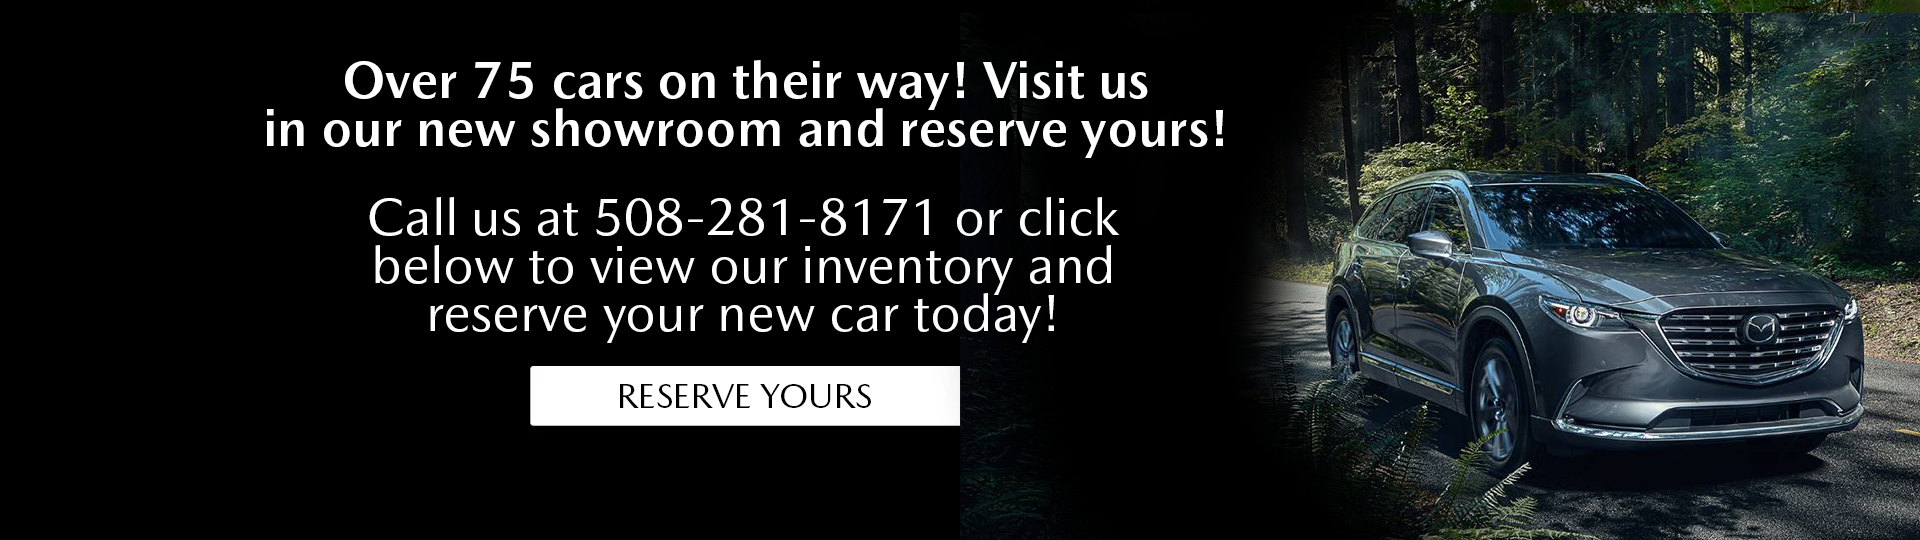 Reserve Your New Car Today!